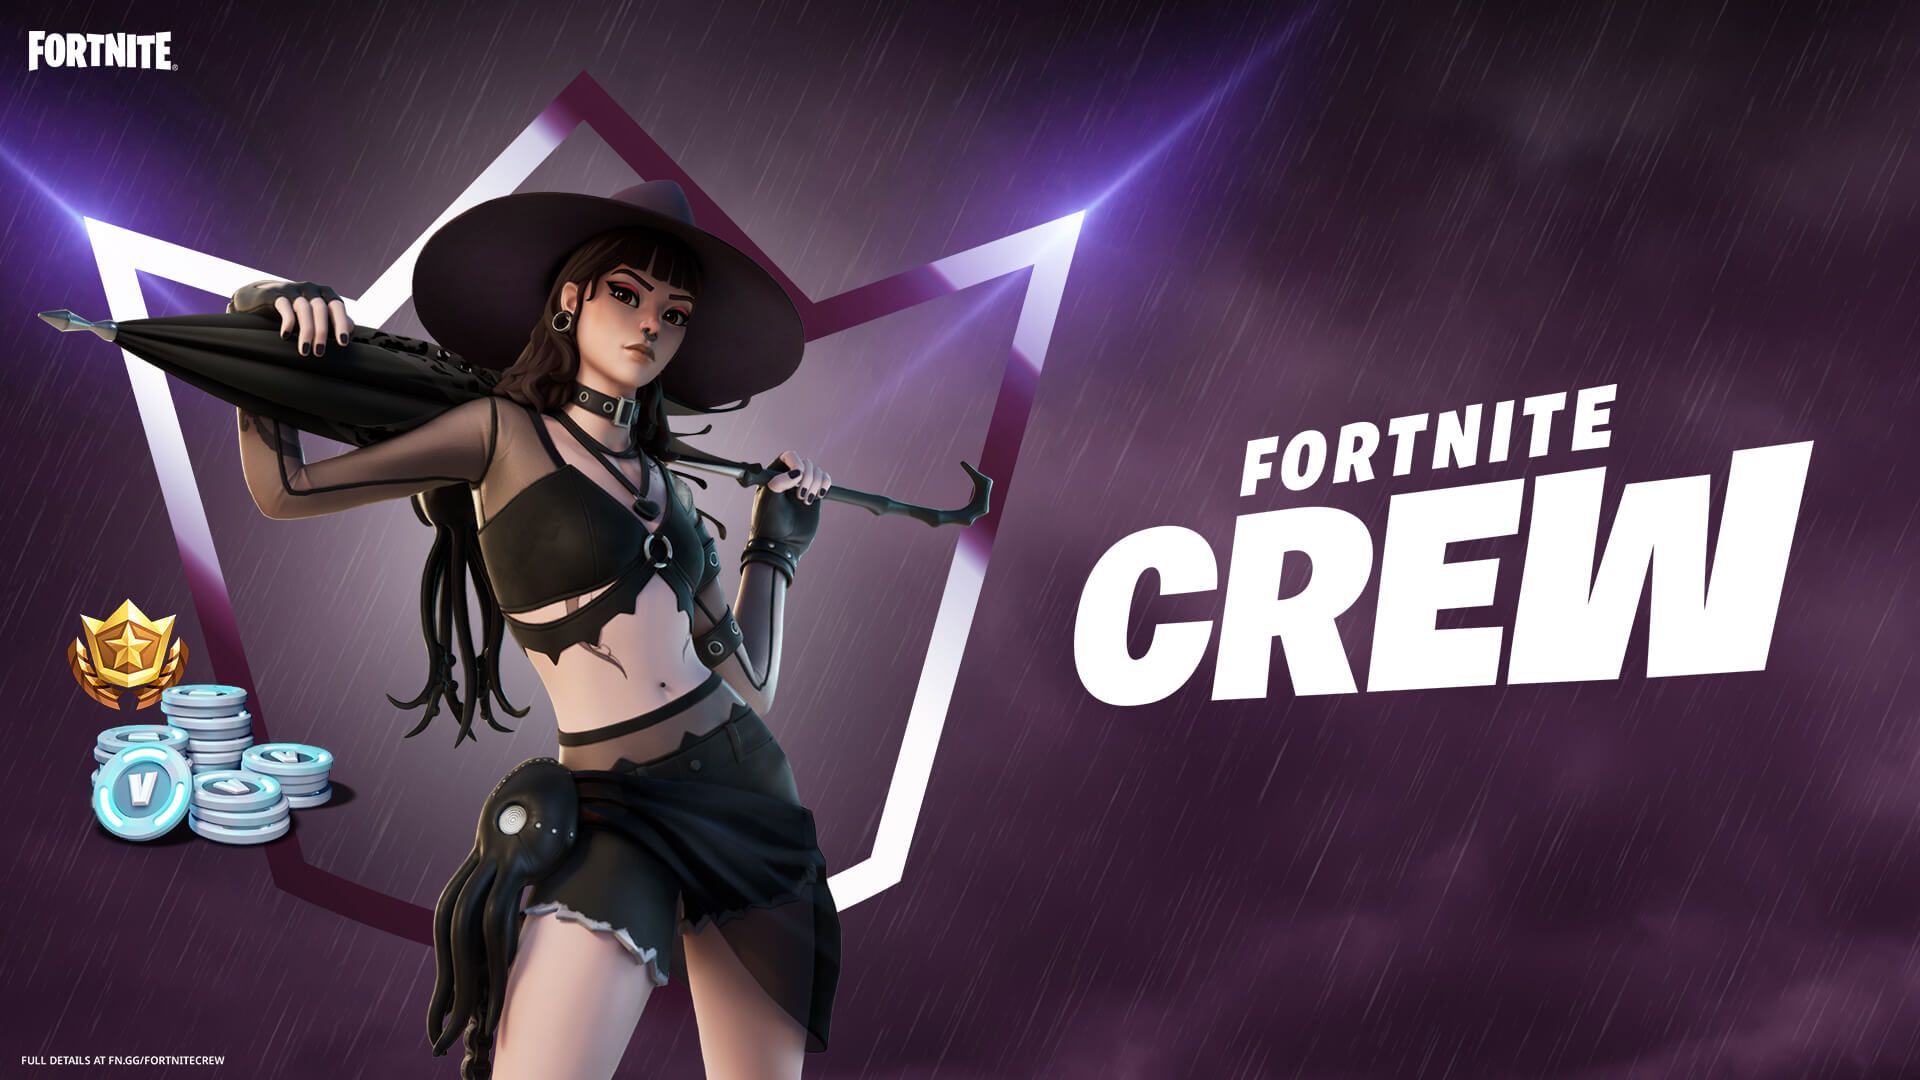 In this article, we are going to go over everything you have to know about the New Fortnite crew skin Phaedra that will be released in July 2022.